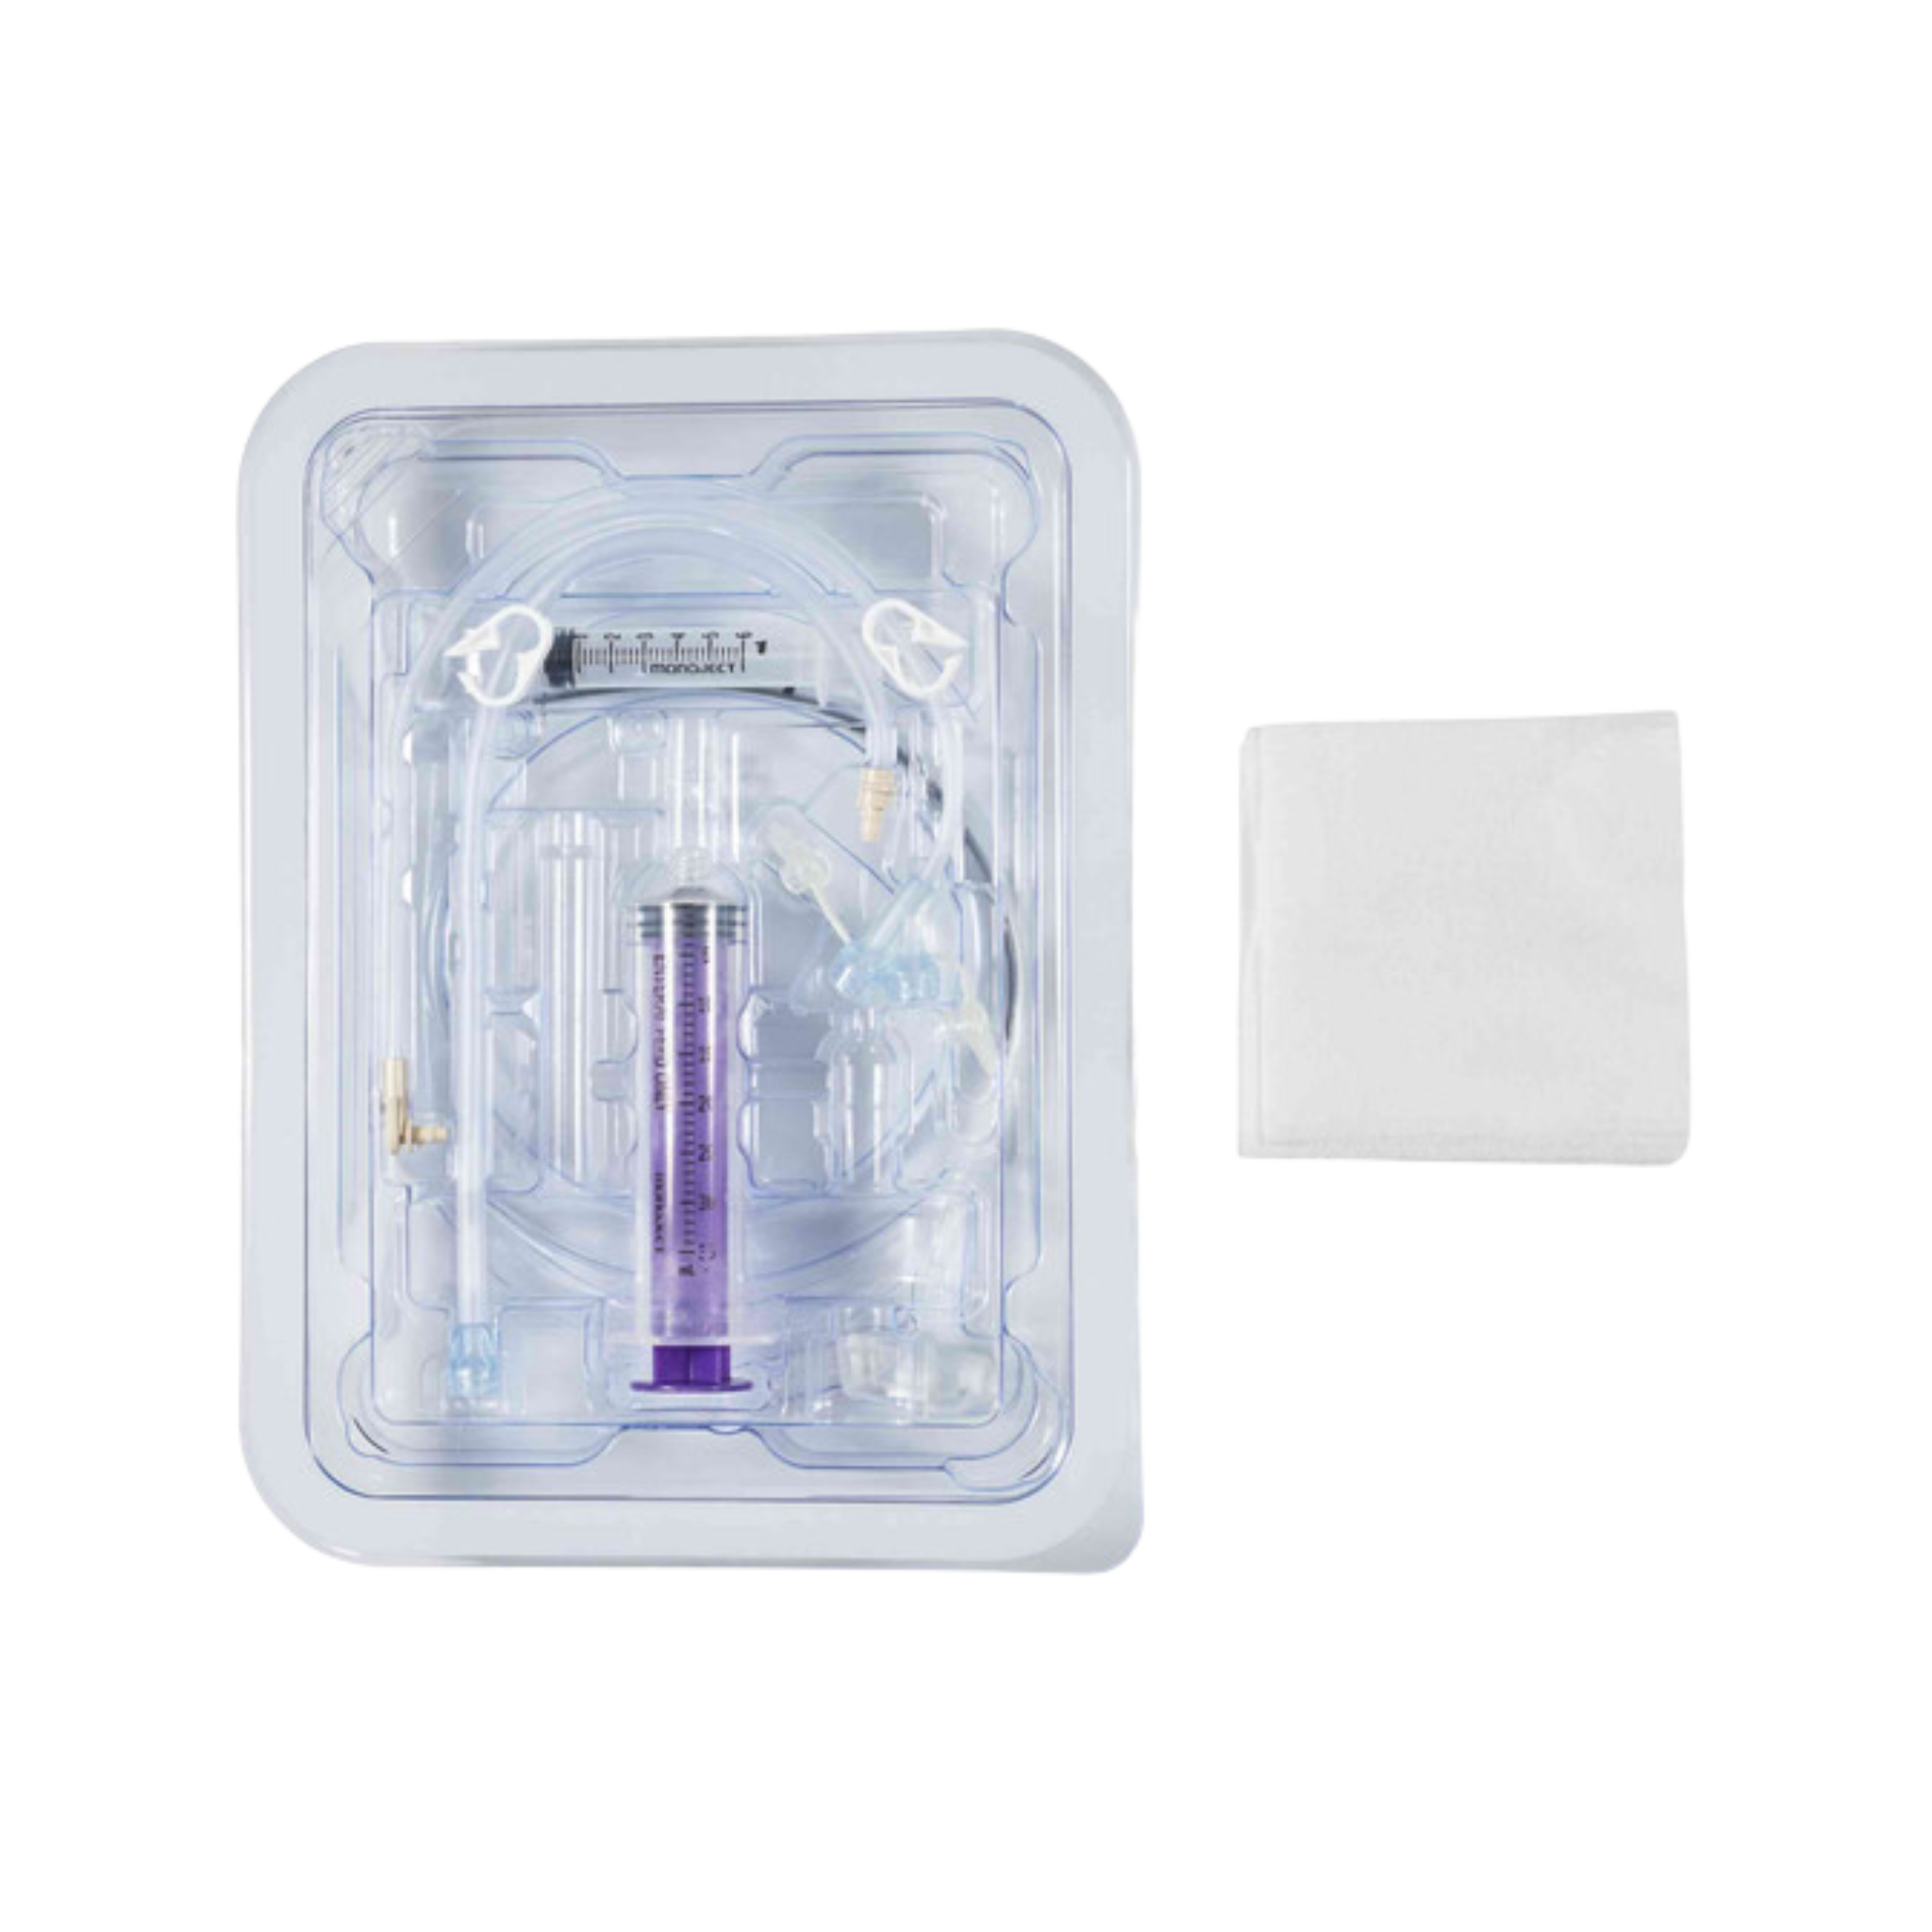 Avanos 18Fr Mic-Key Low-Profile Gastric-jejunal Feeding Tube With Enfit Extension Sets - All Sizes